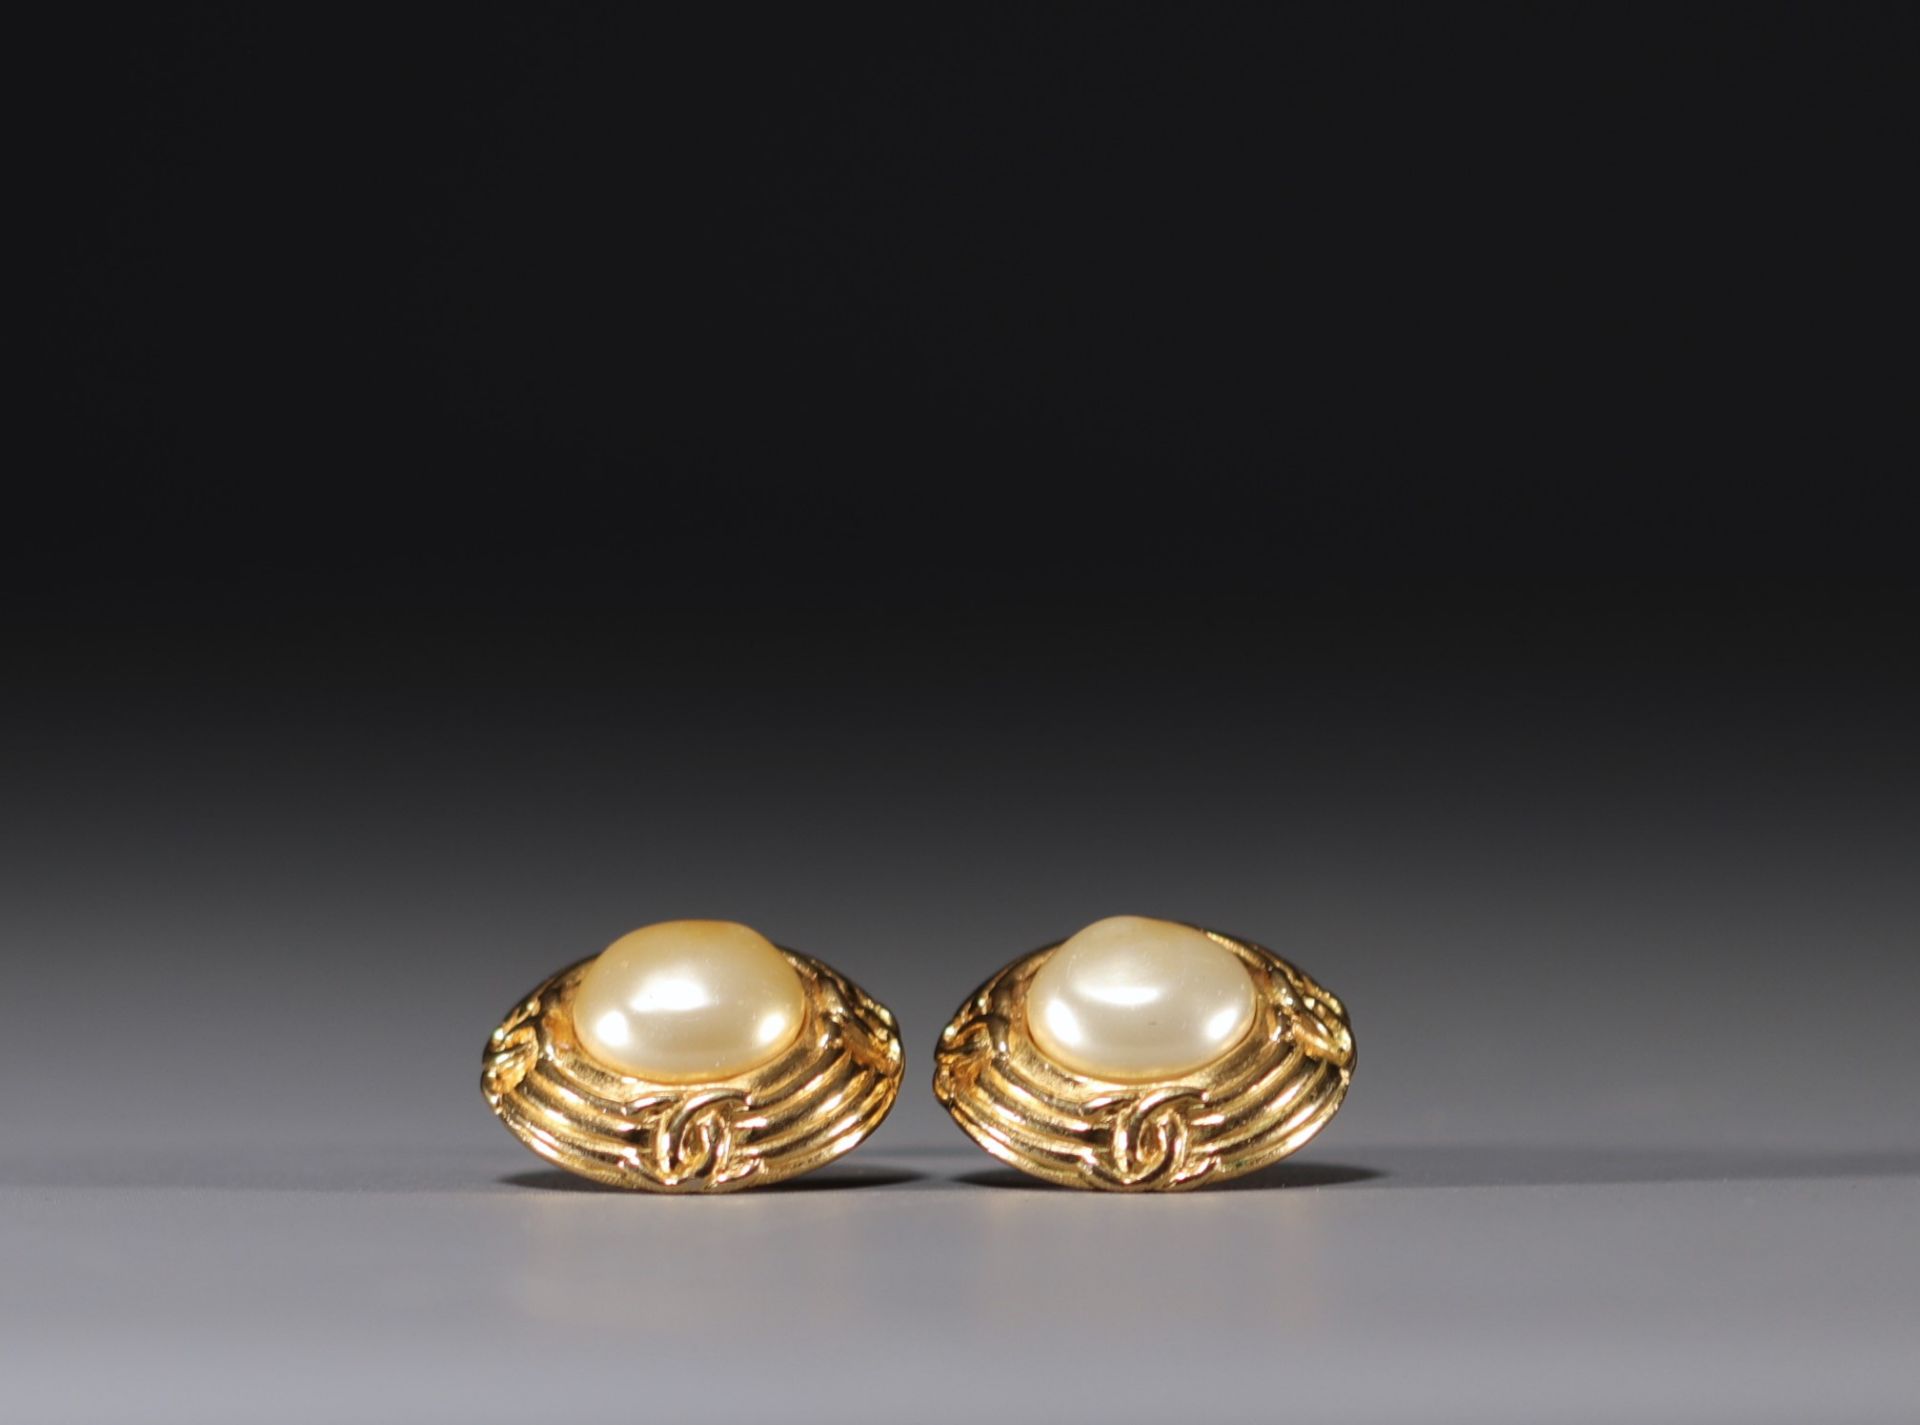 CHANEL - Pair of gold-coloured earrings, mother-of-pearl cabochon. - Bild 3 aus 3